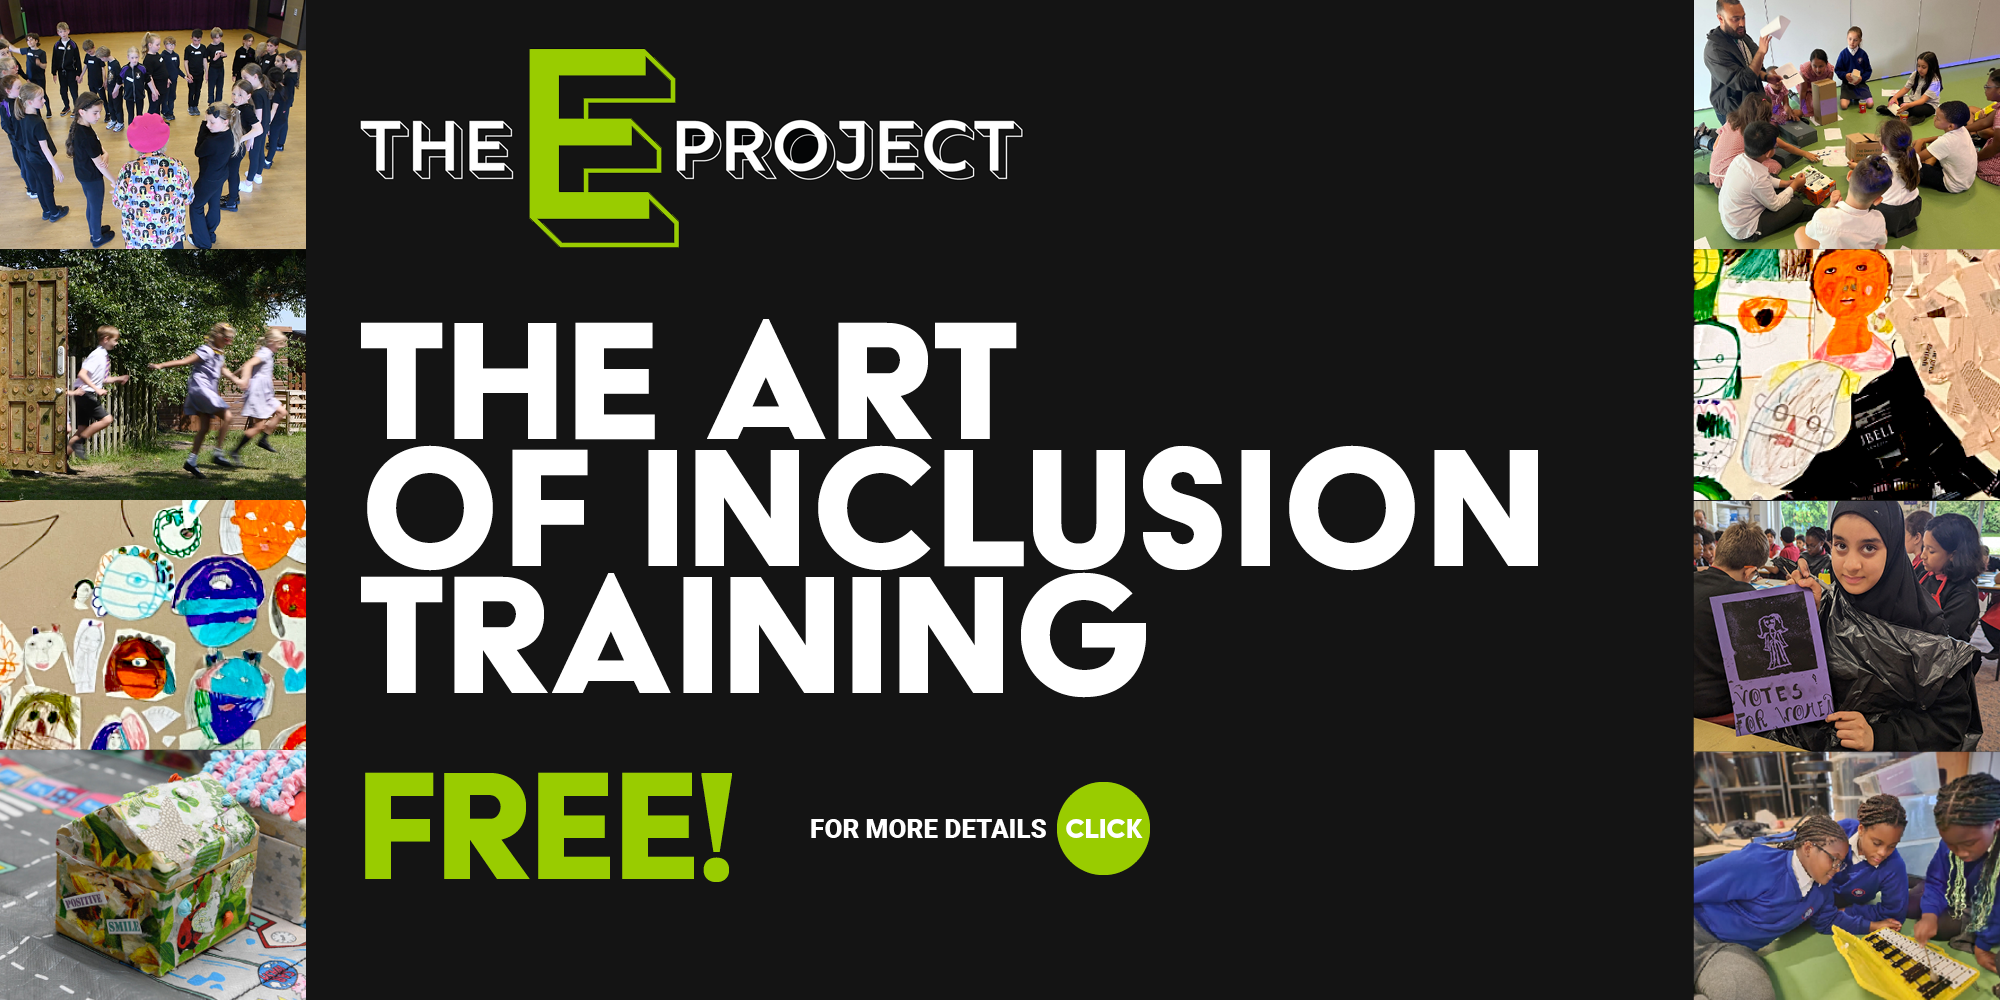 The Art of Inclusion